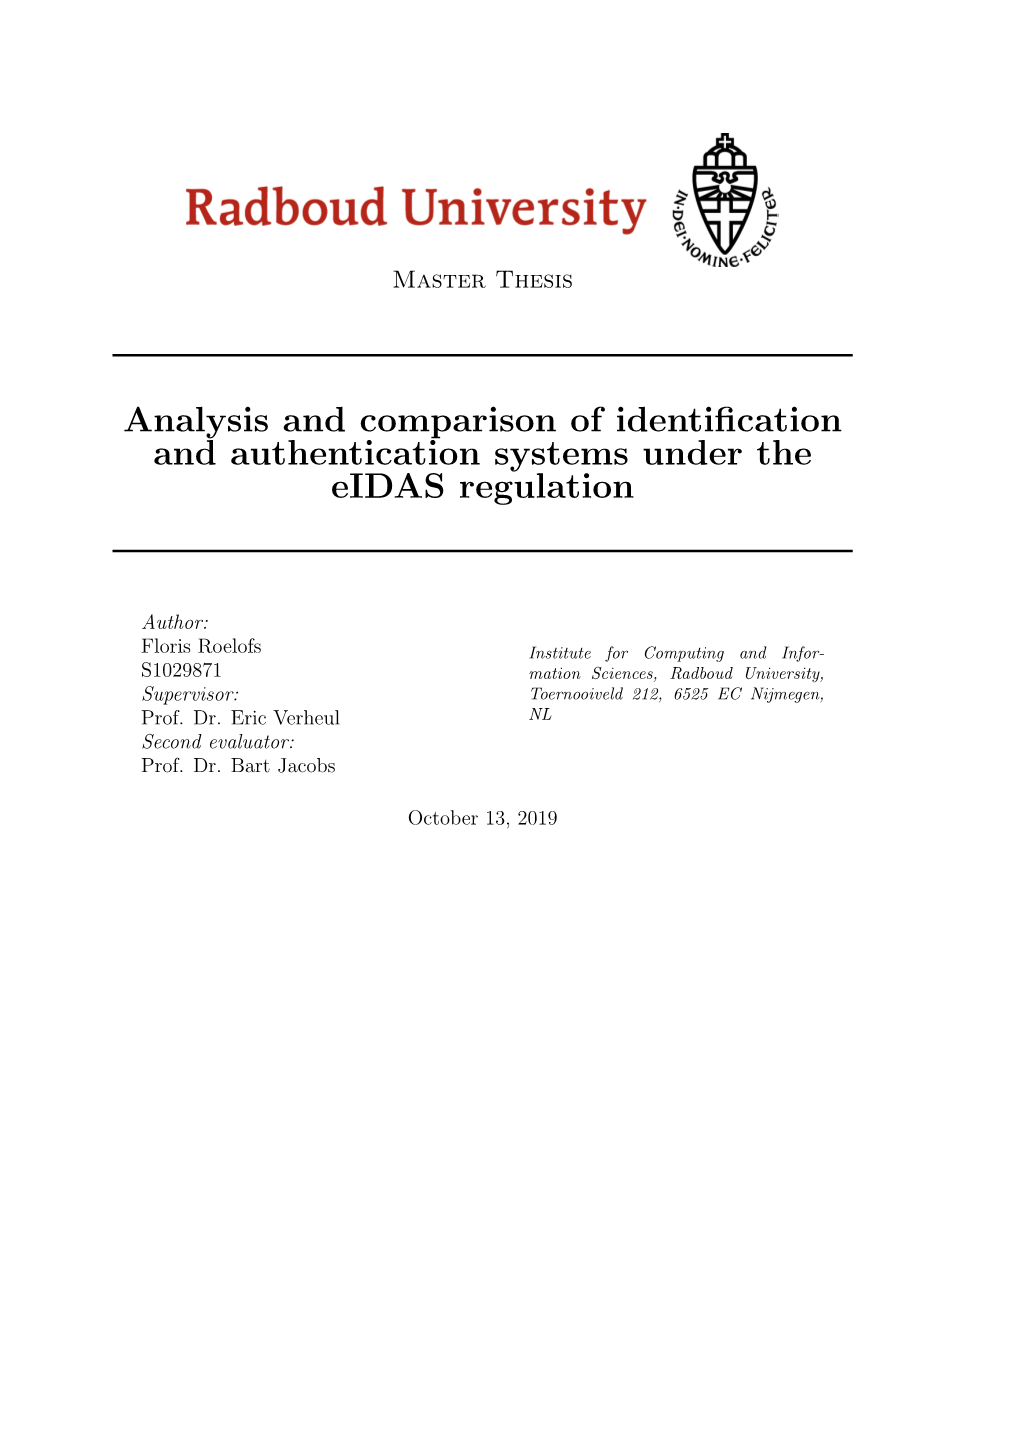 Analysis and Comparison of Identification and Authentication